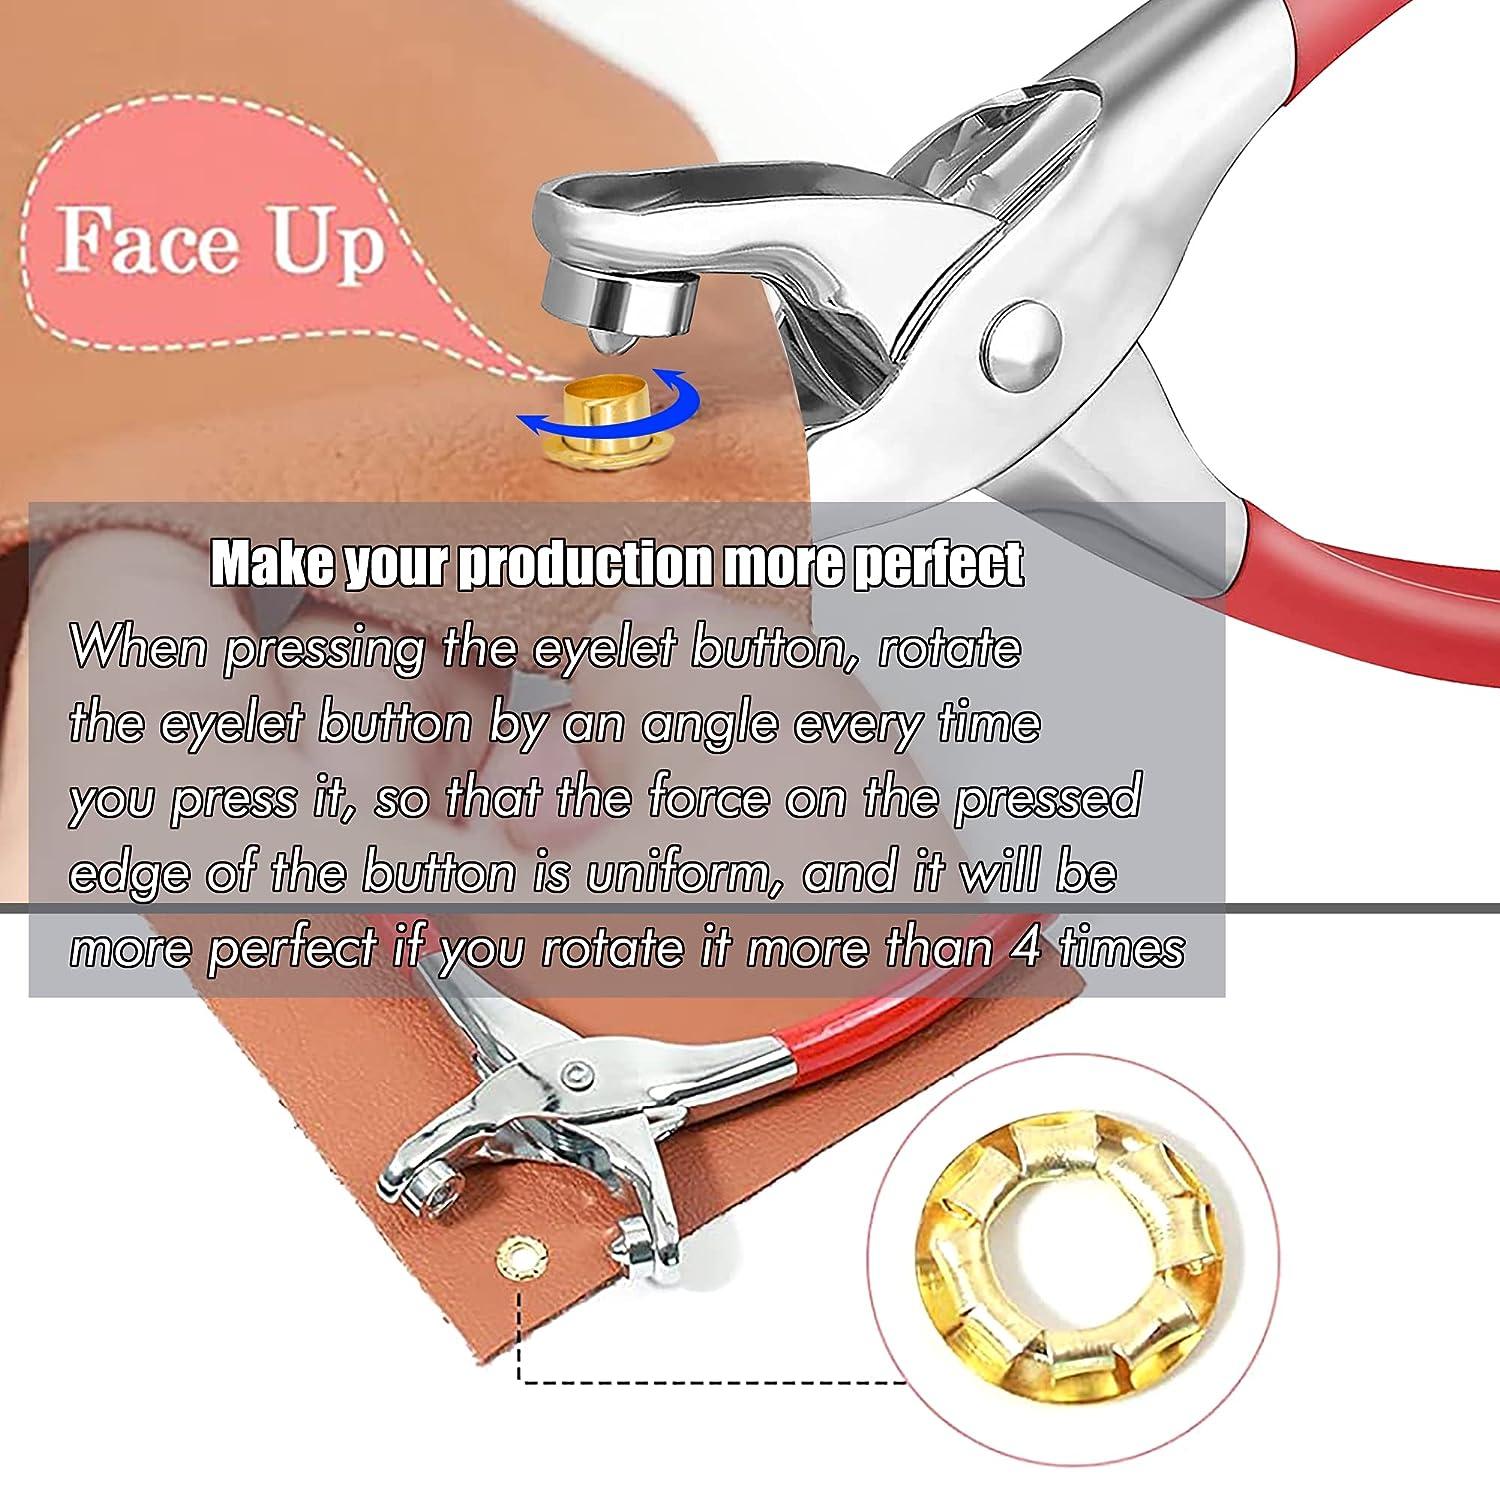 Grommet Eyelet Pliers Kit 1/4 Inch 6mm with Eyelet Hole Punch and 400 Metal  Eyelets with Washers,Portable Grommet Hand Press kit for  Leather,Belt,Shoes,Fabric,Cloths